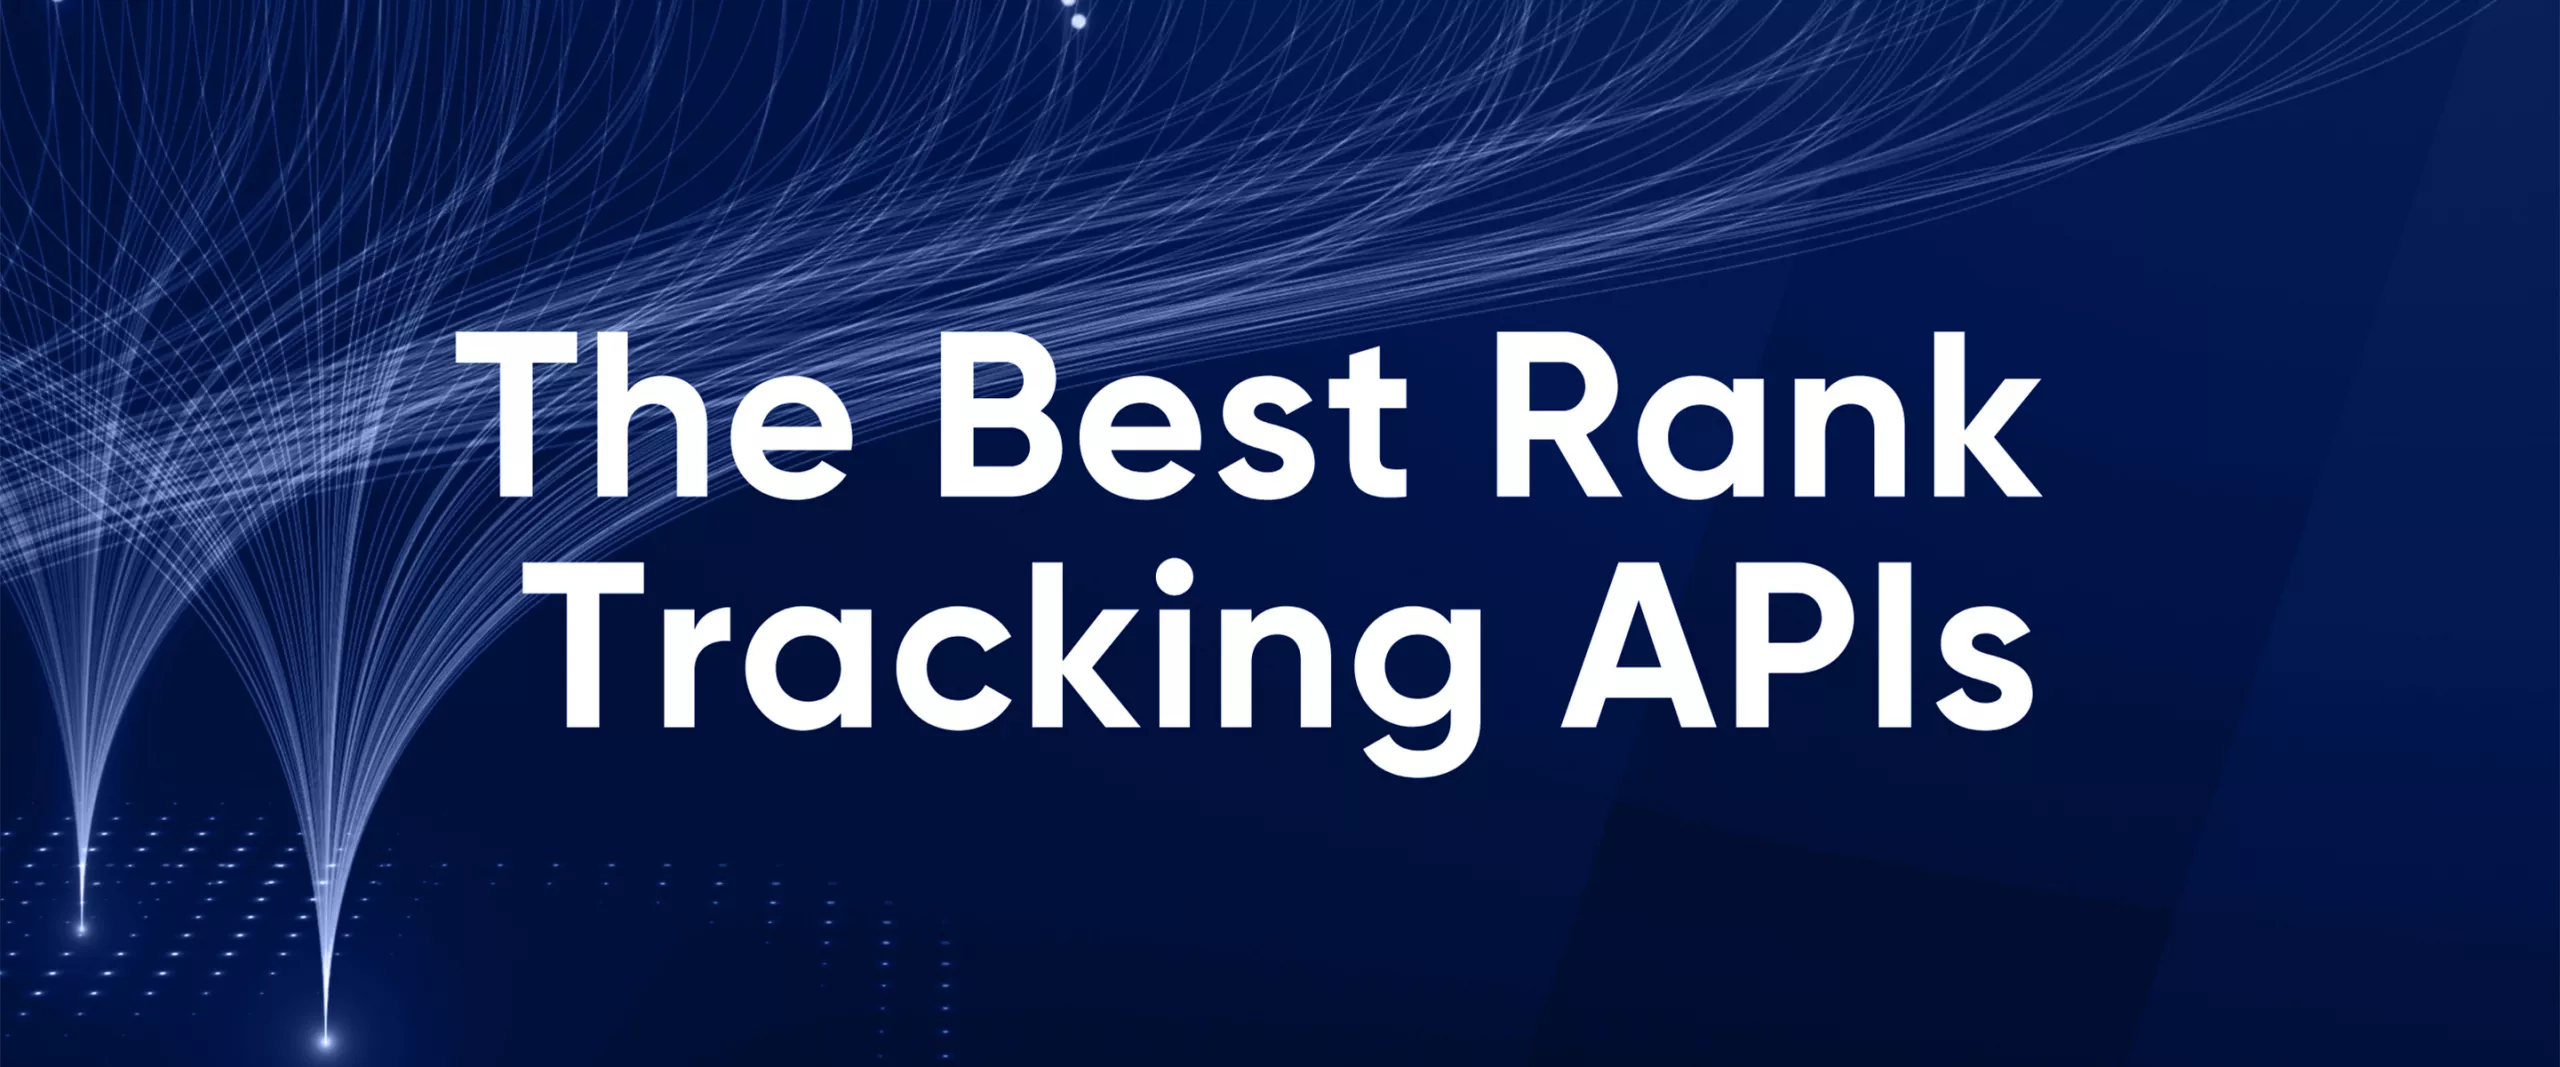 10 Best Rank Tracking APIs for Accurate Keyword Tracking